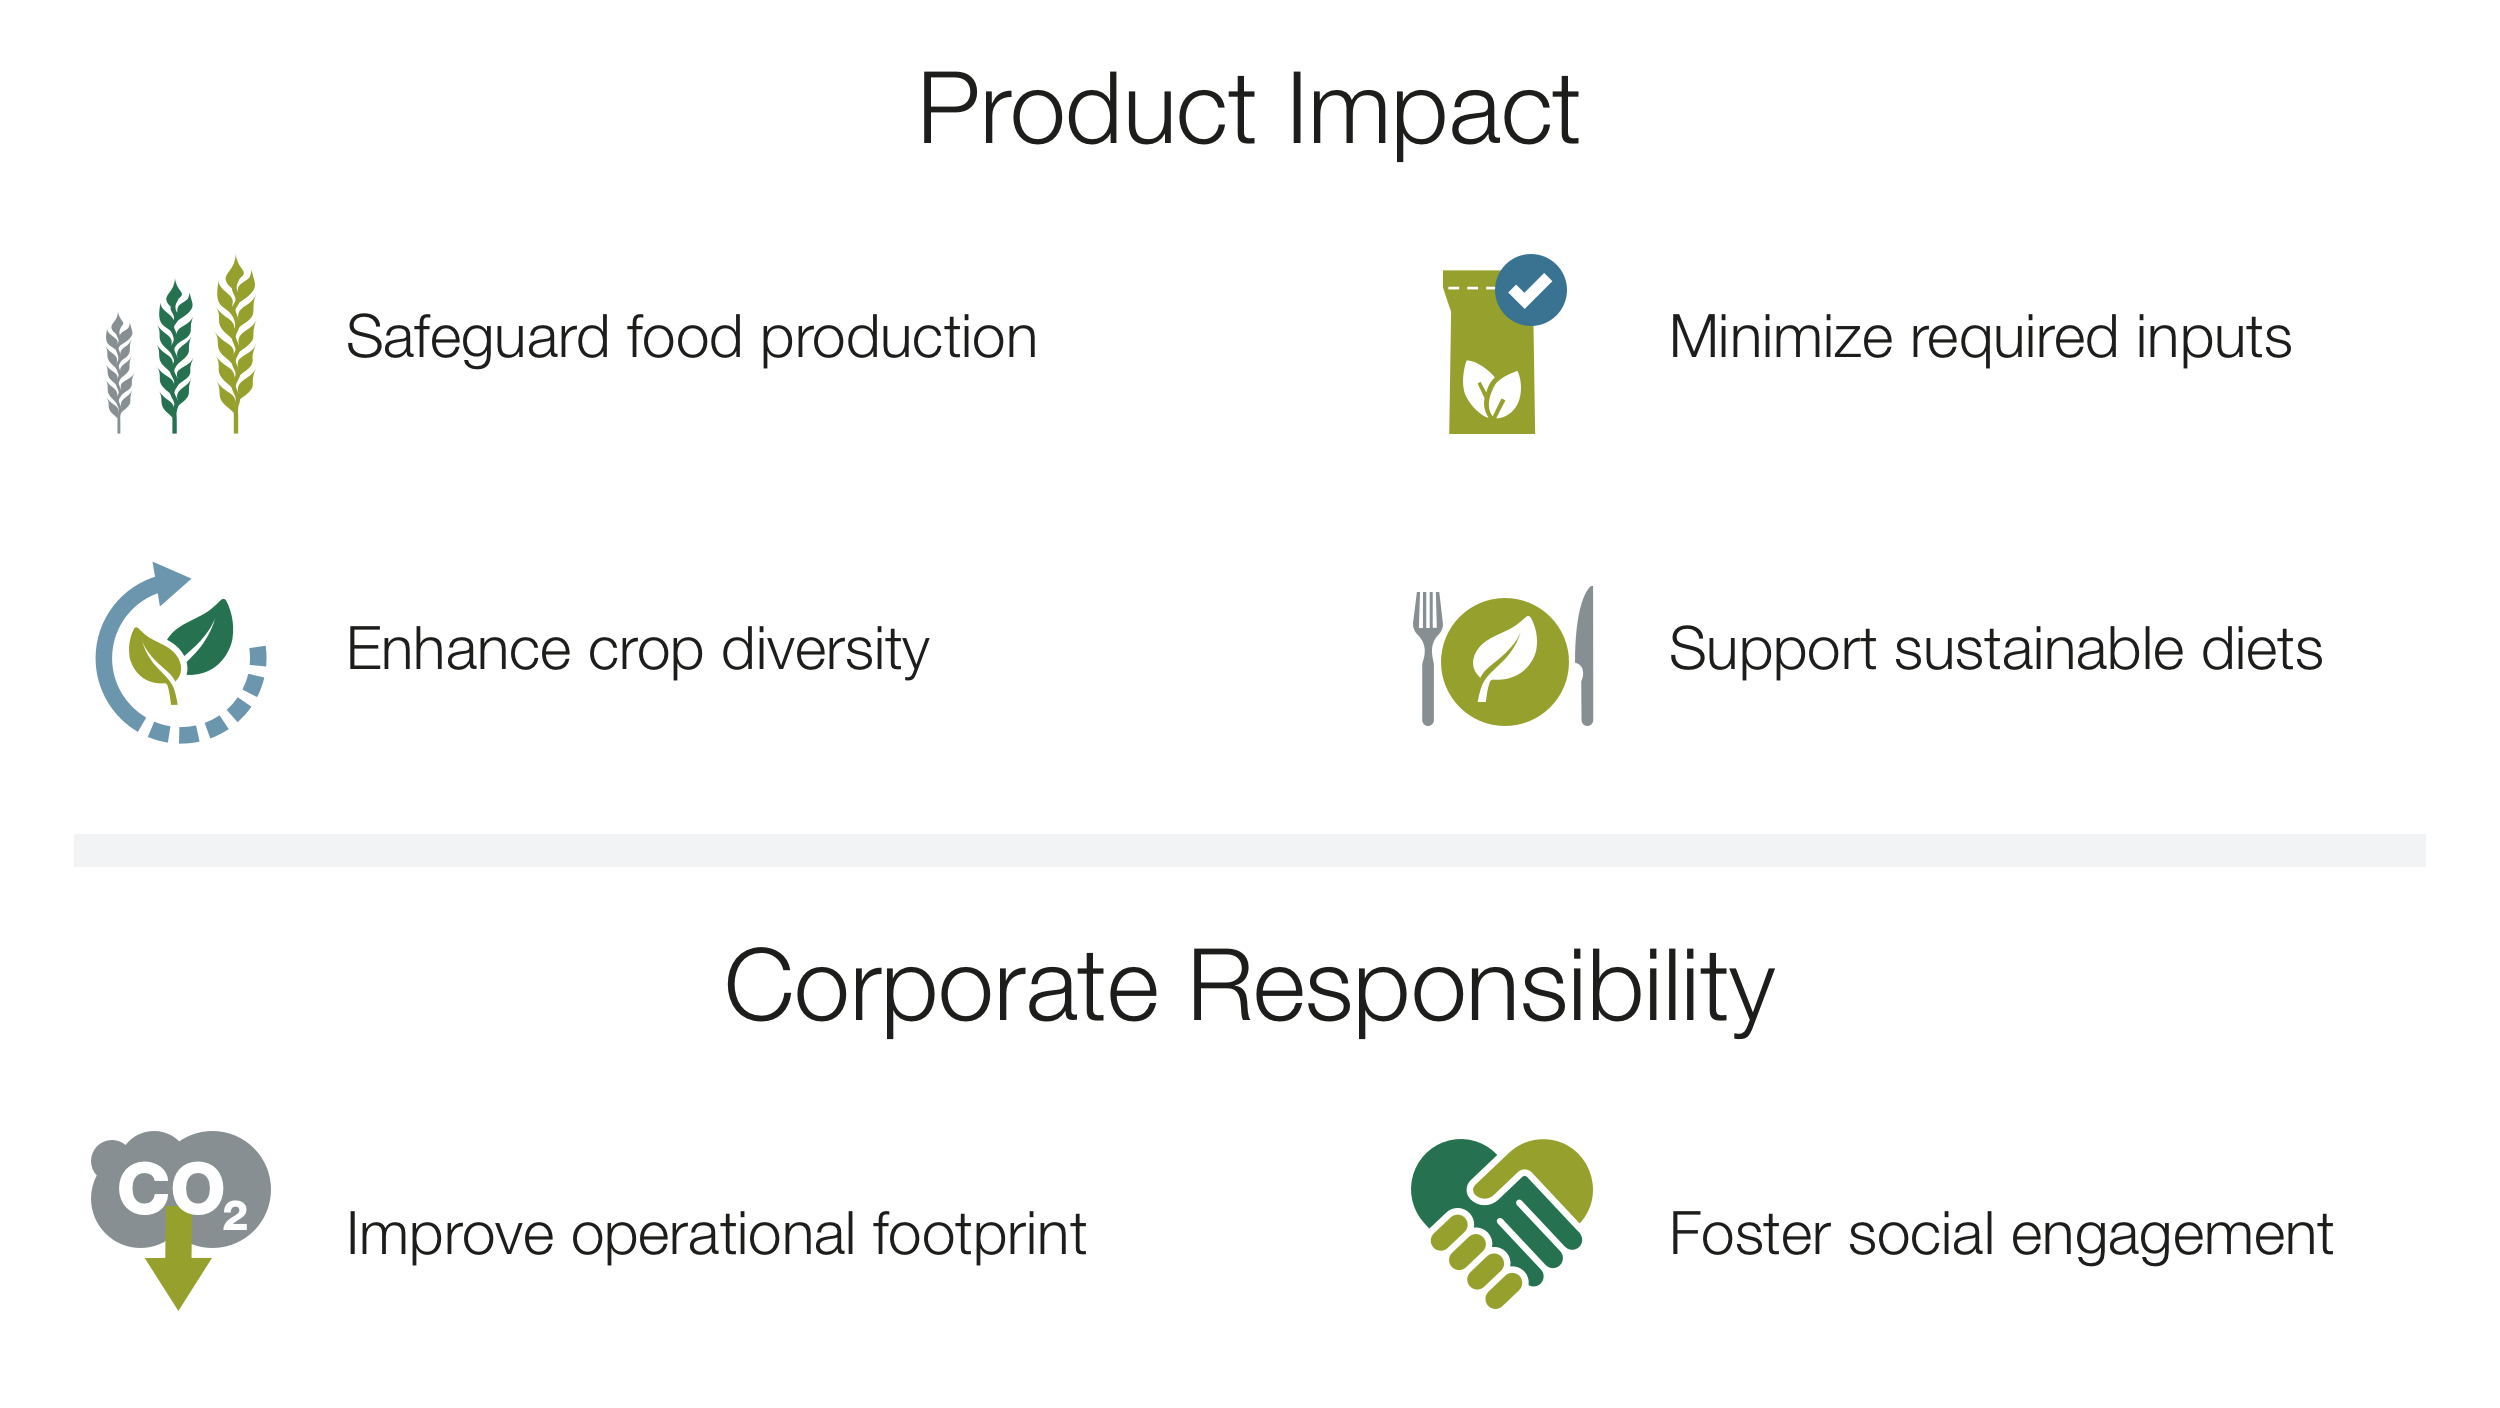 KWS-PM-2021-09-20-kws-sustainability-overview-graphic-2_en.png